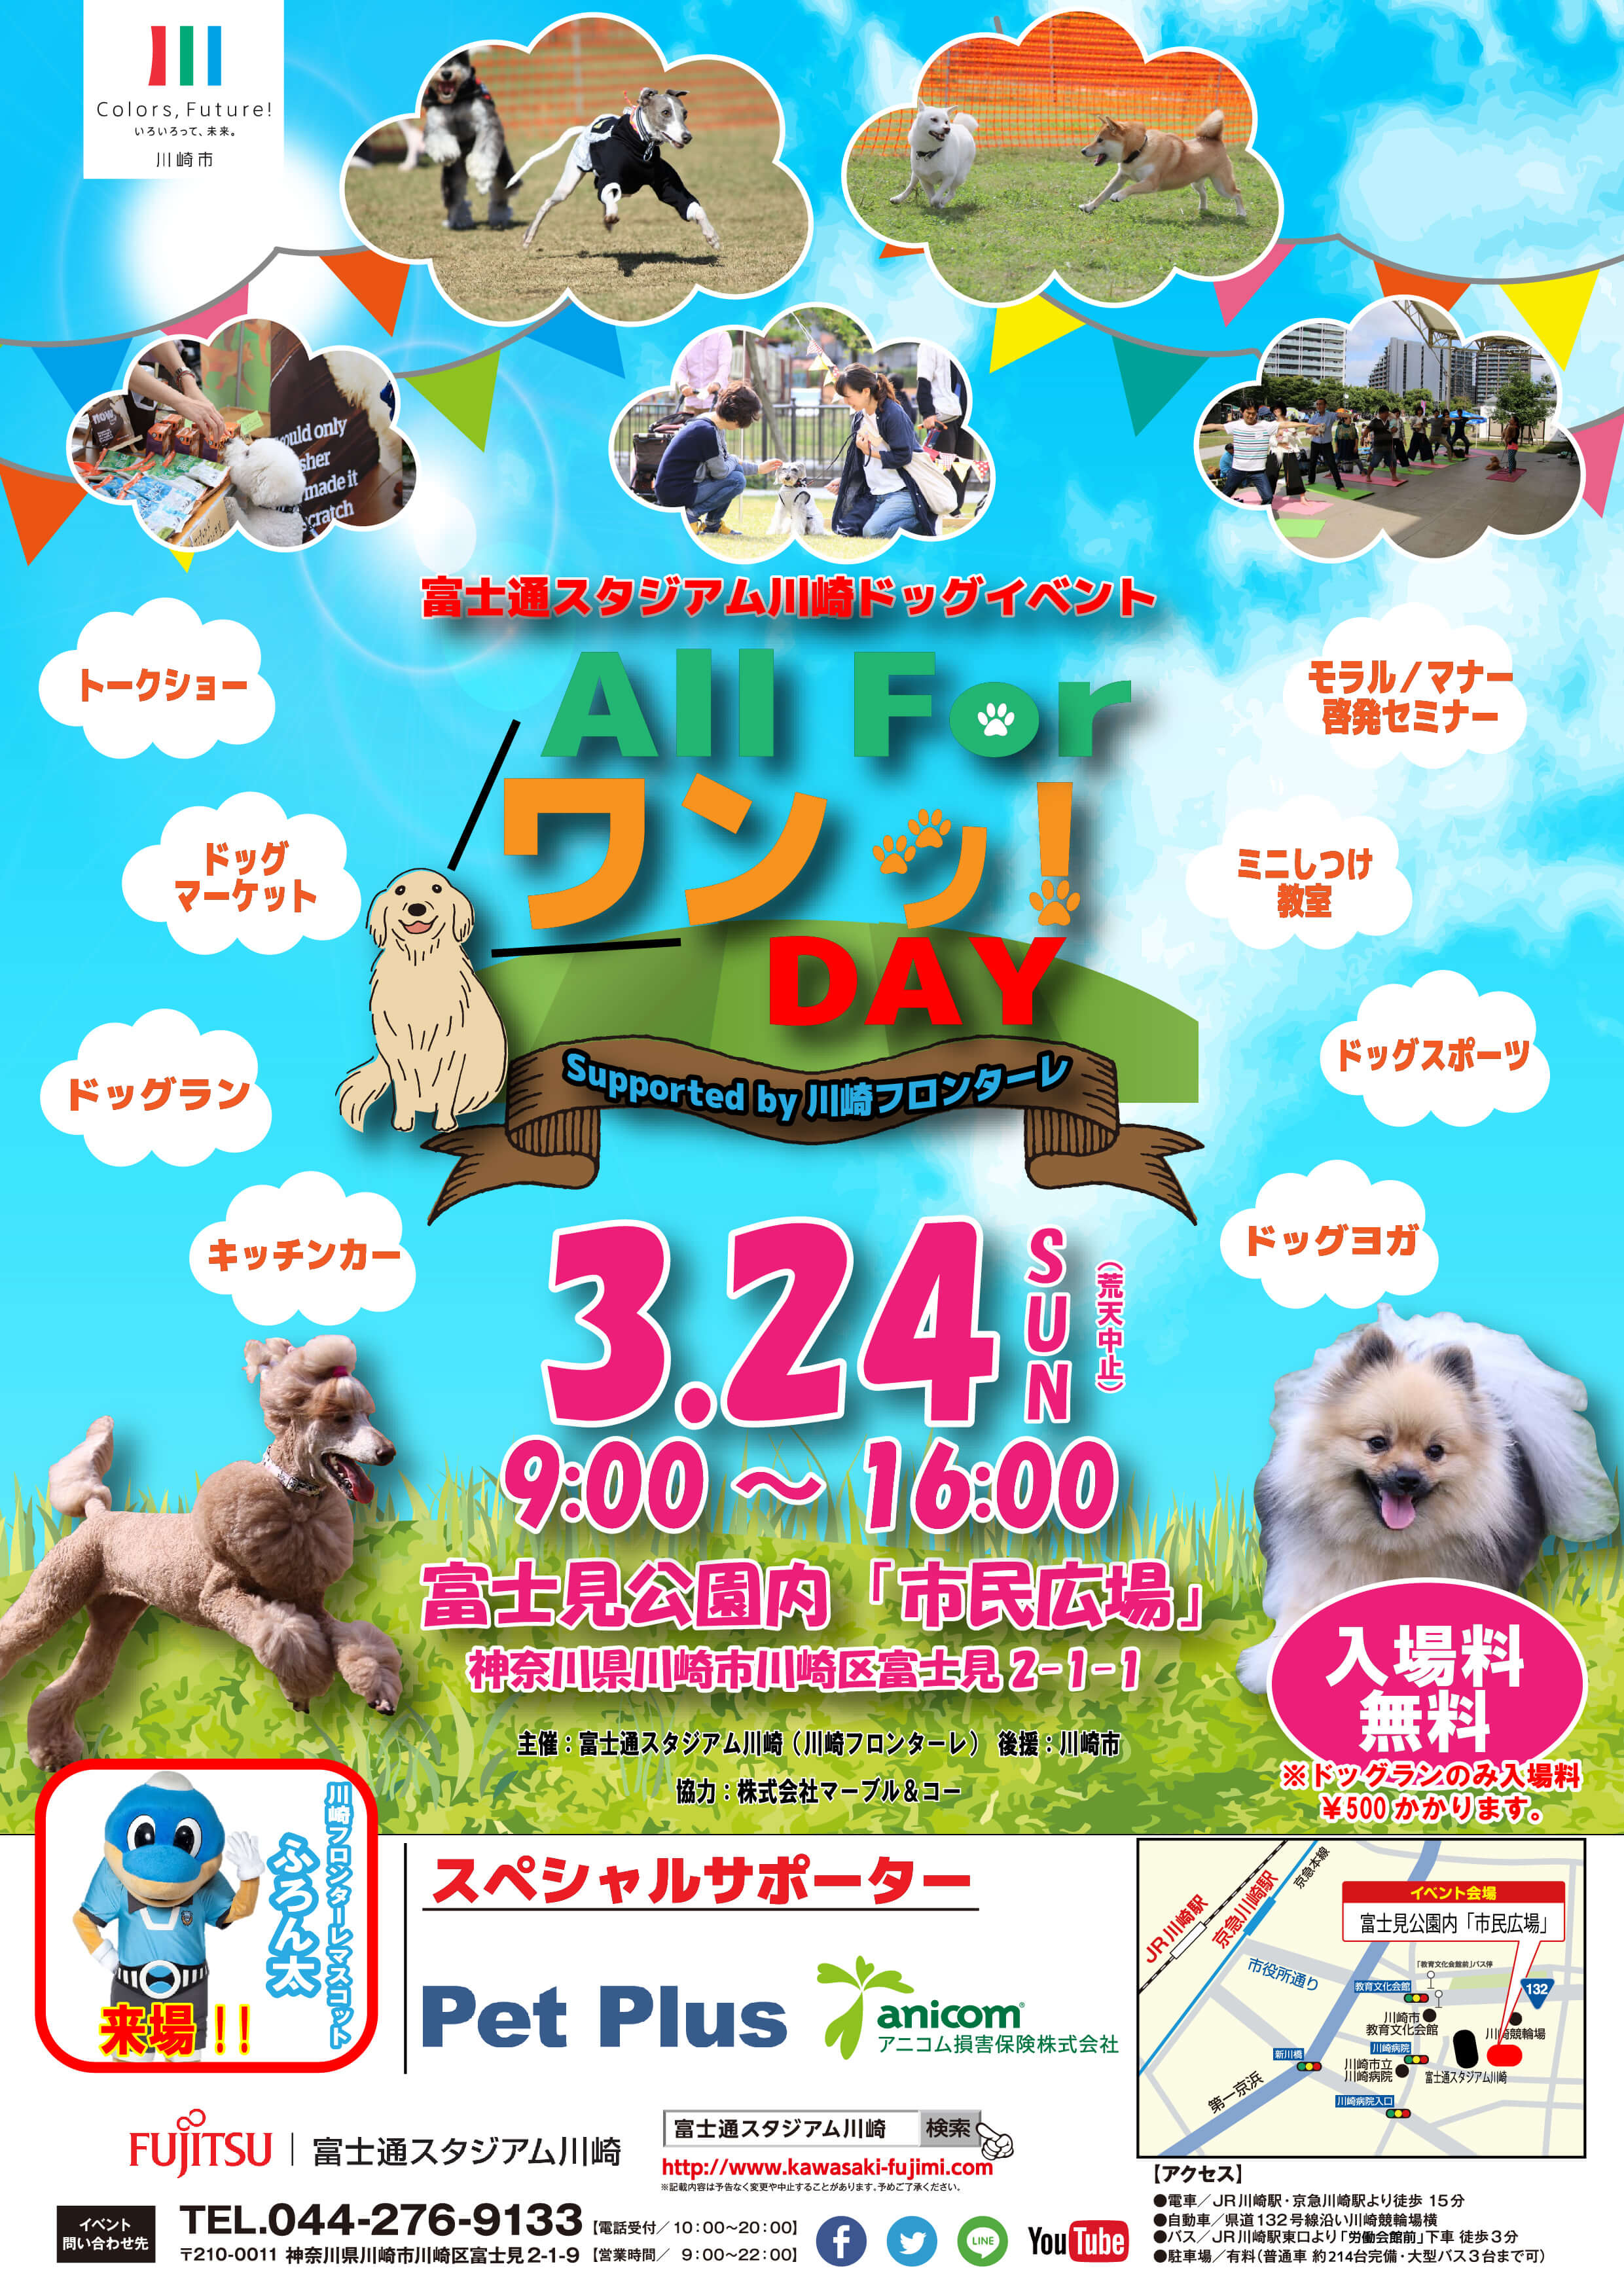 All  For ワンッ!! DAY 2019 開催のお知らせ！